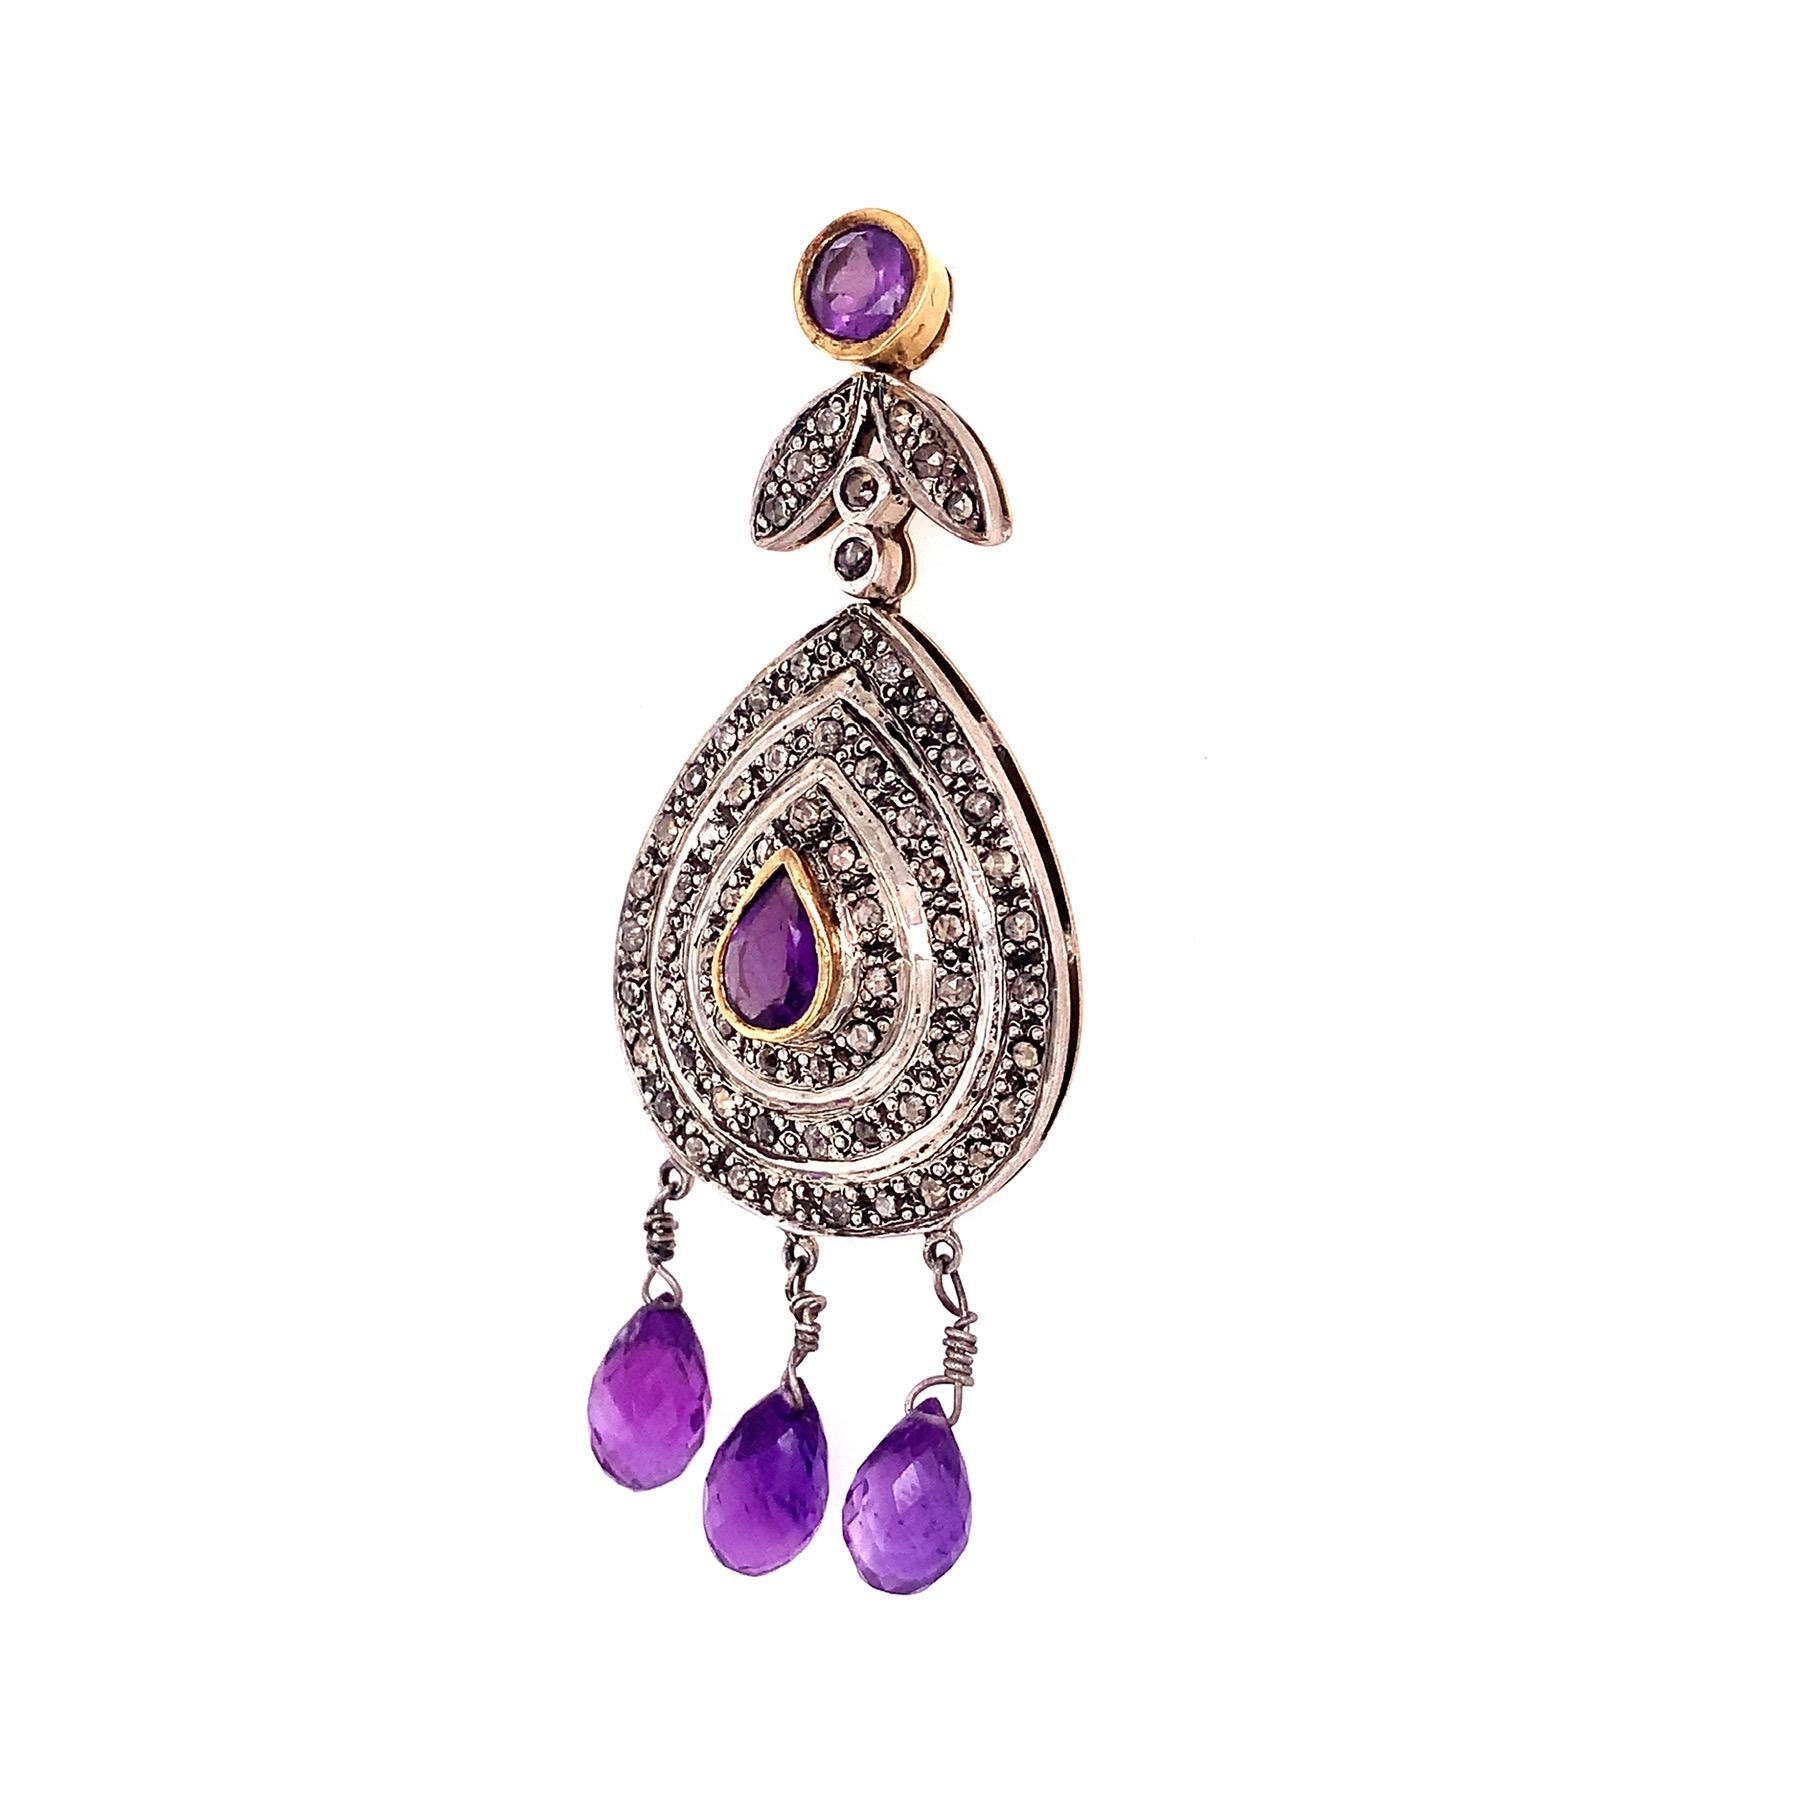 Rustic collection,

Drop Amethyst with rustic Diamonds Pendant set in sterling silver.